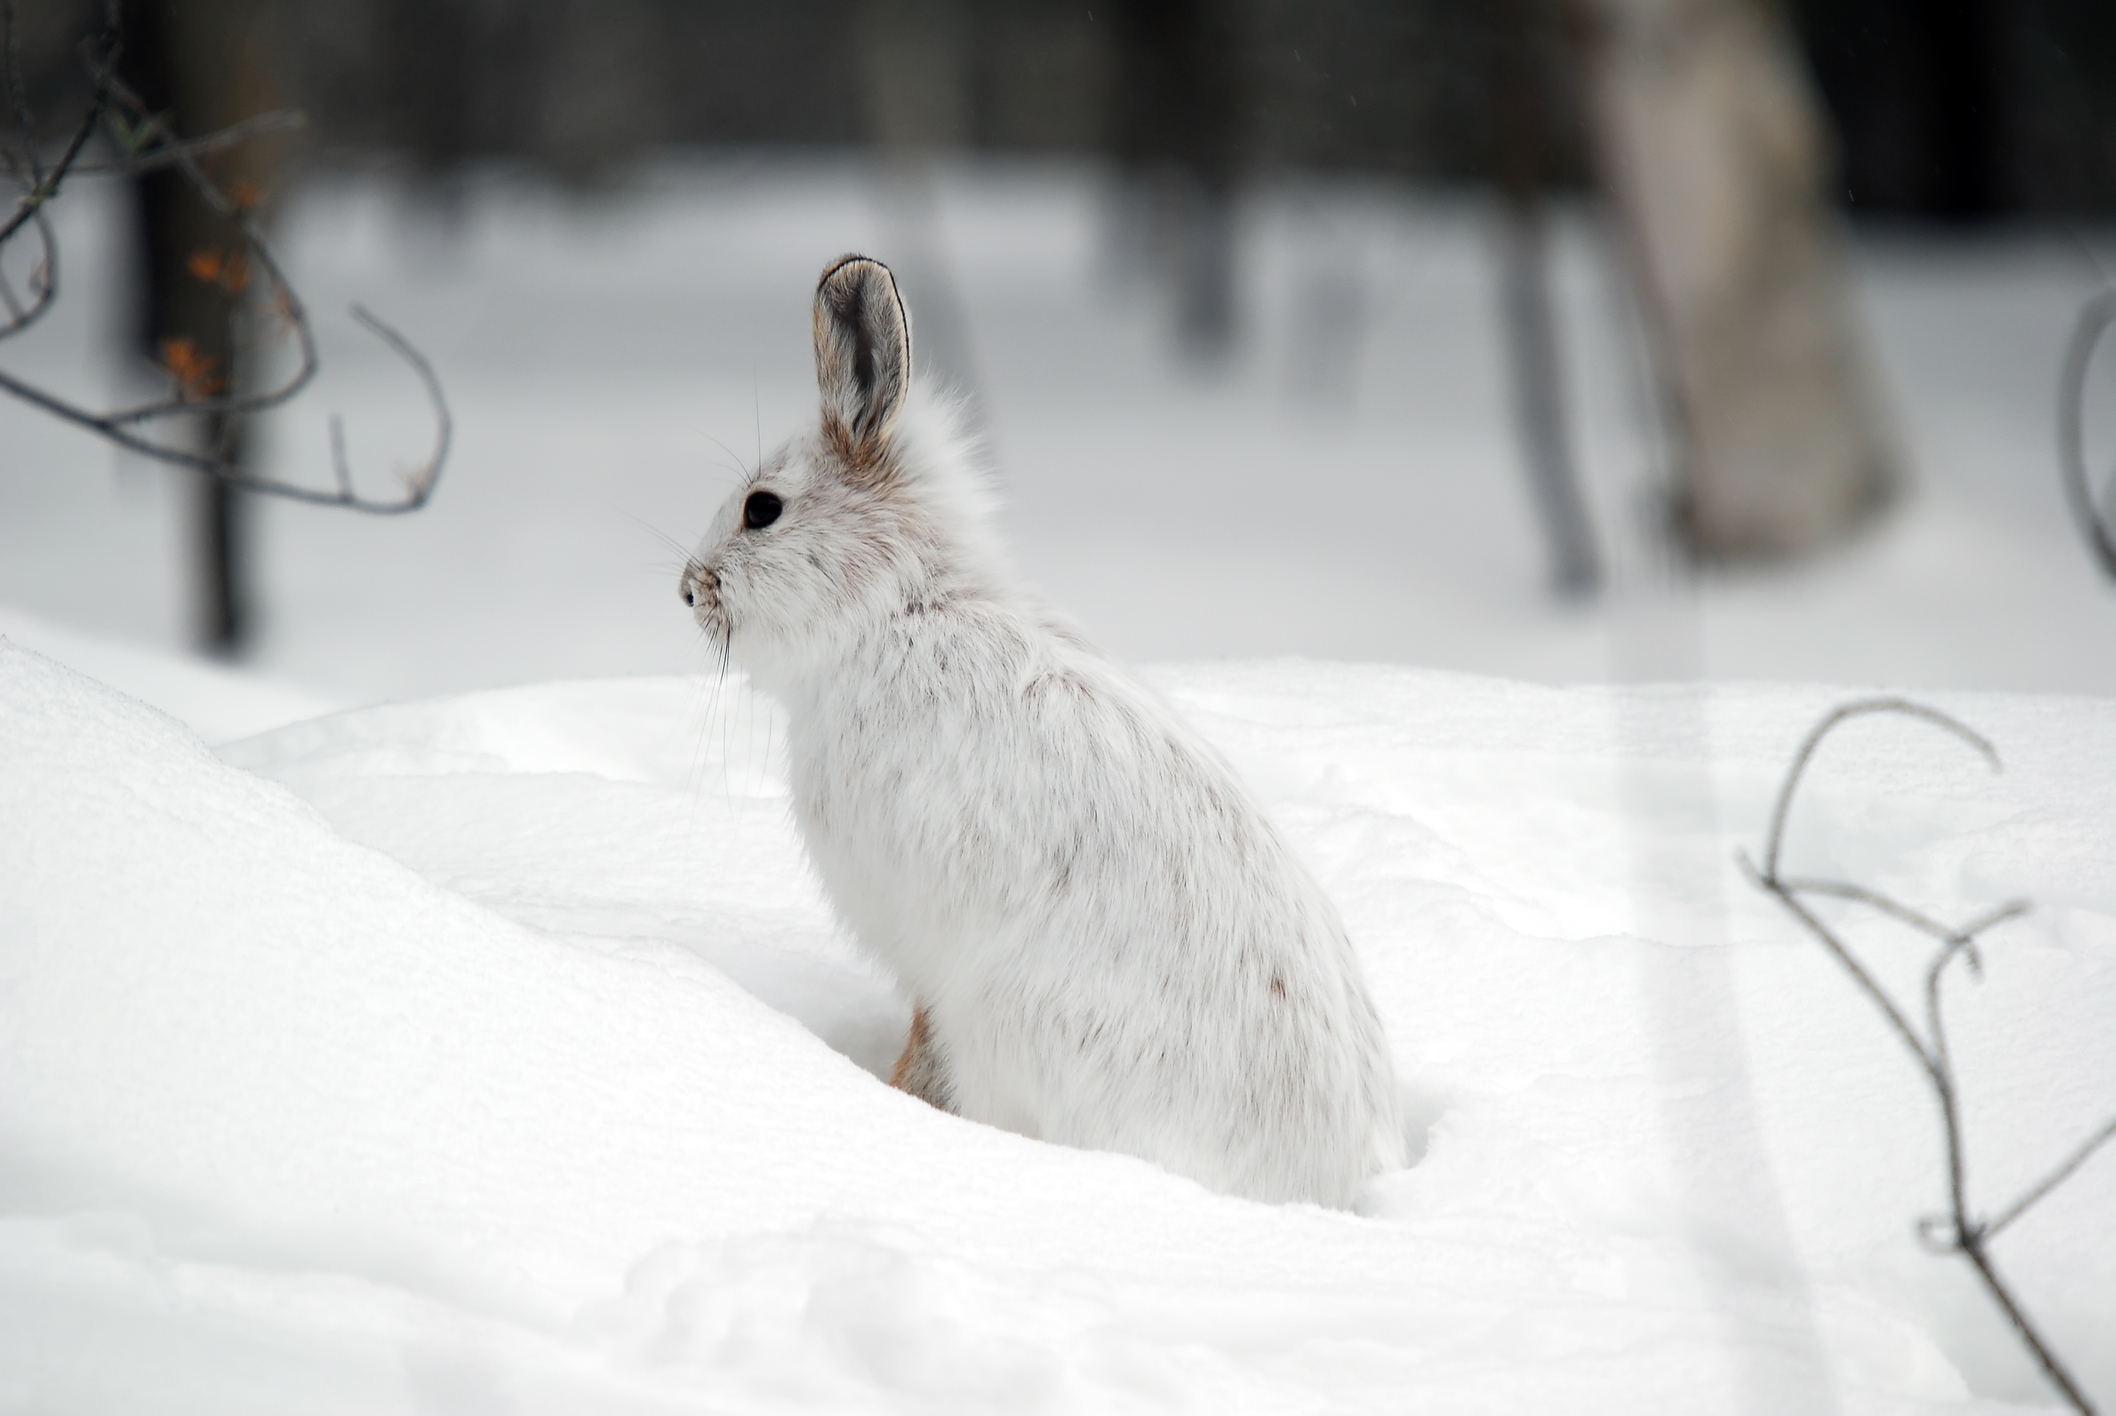 "Being nourished together" - Snowshoe Hare